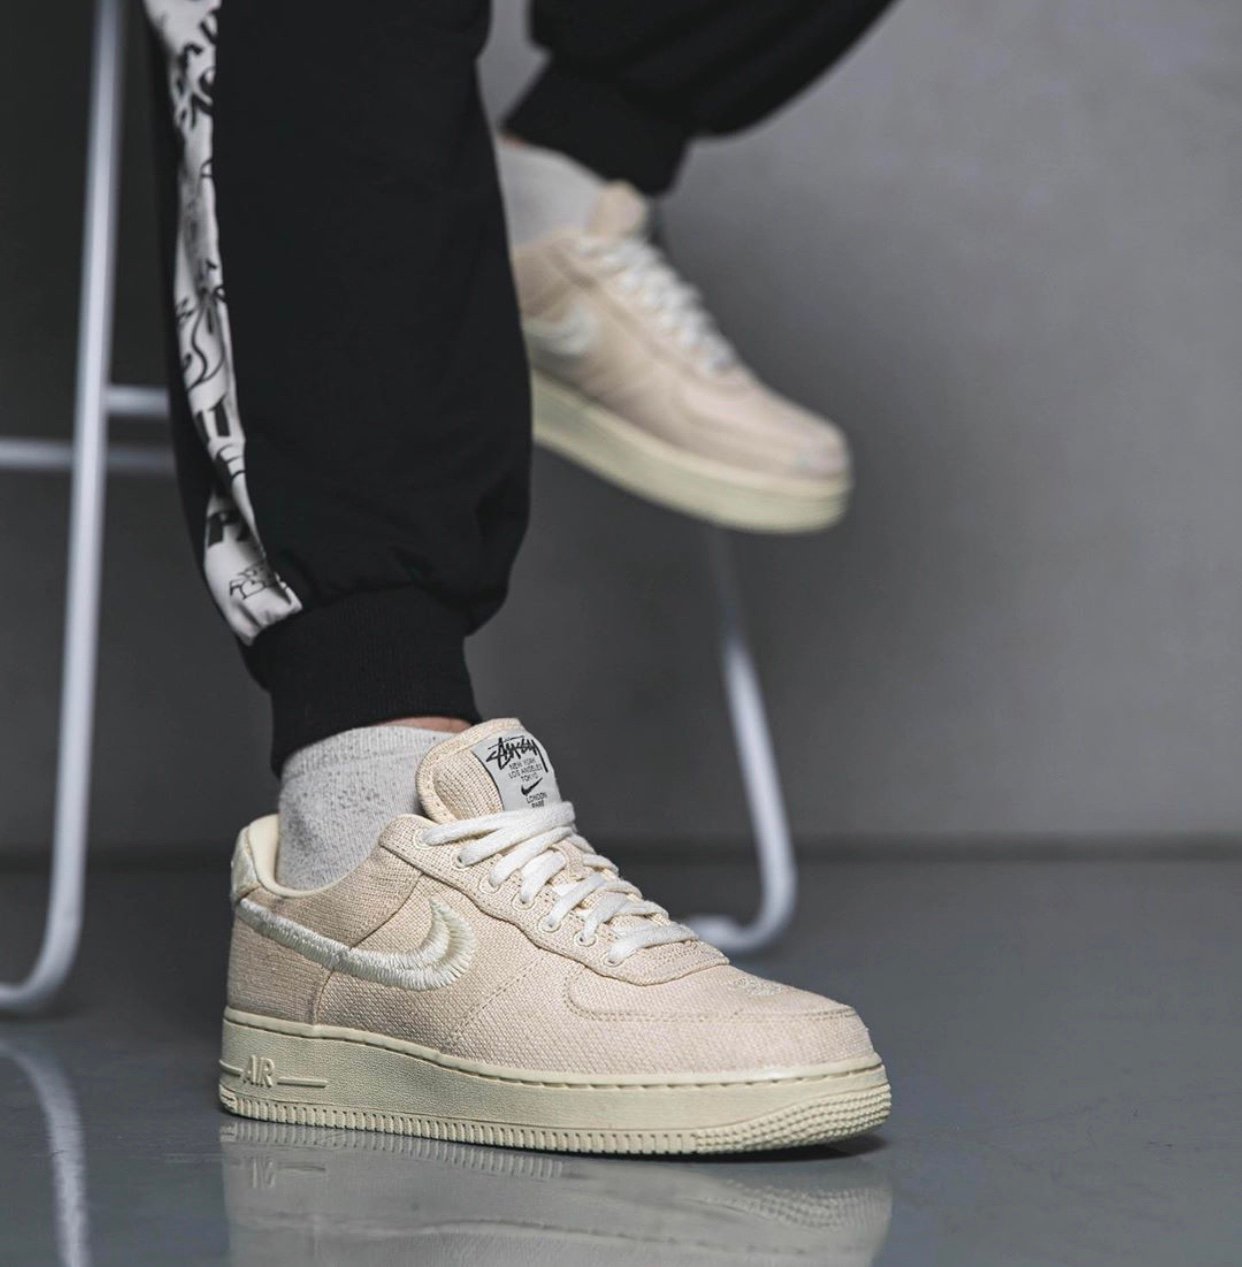 Stussy Nike Air Force 1 Low CZ9084-001 CZ9084-200 Release Date